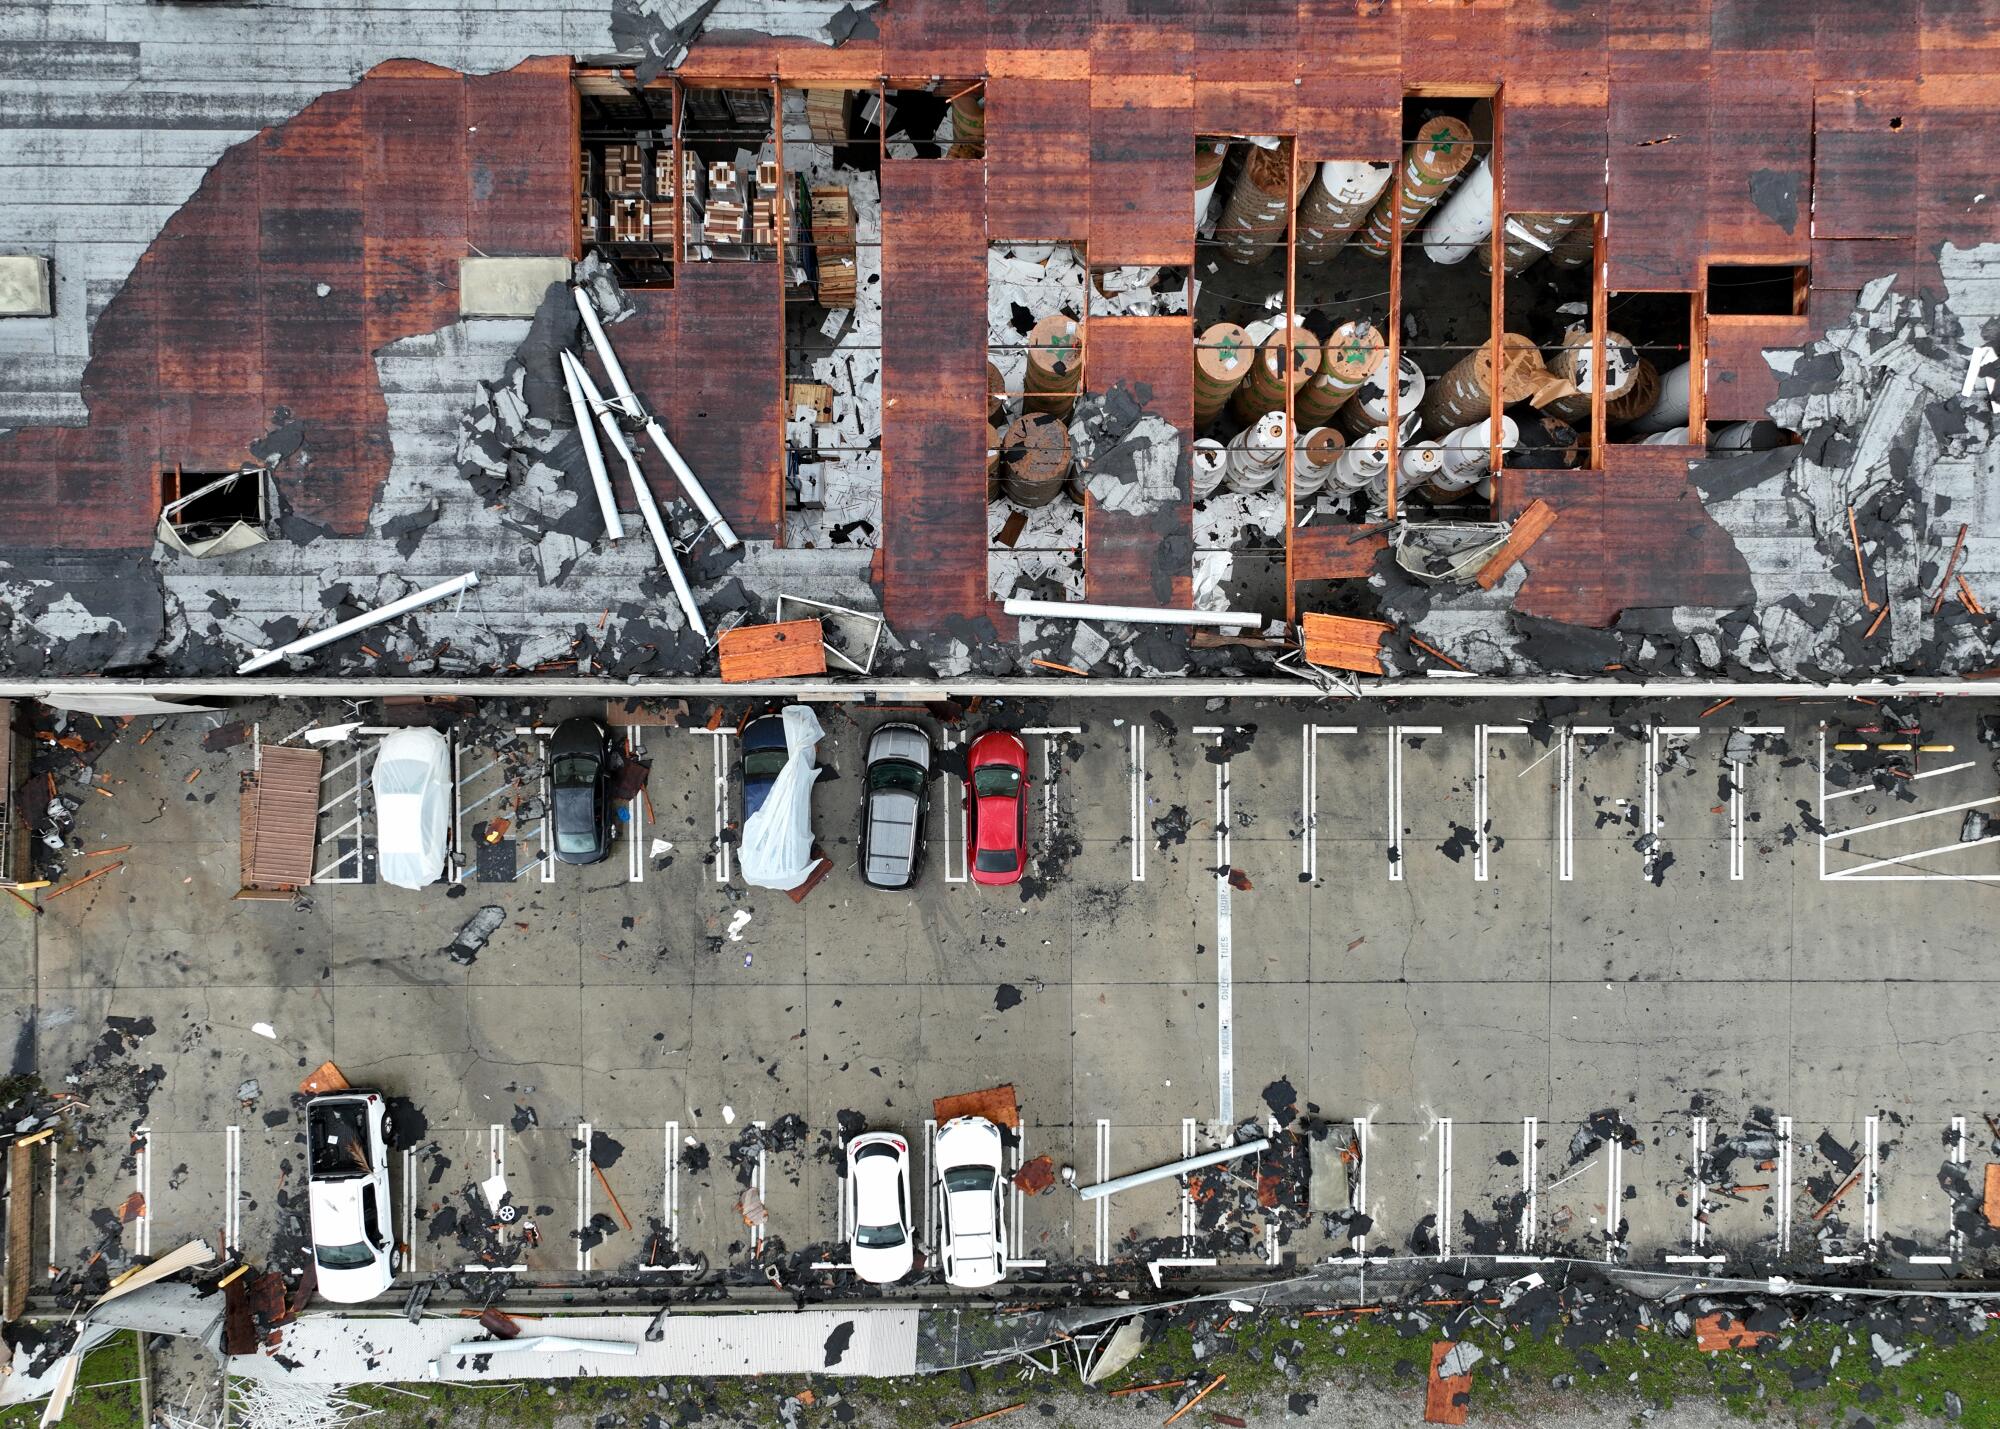 An aerial view of a building with part of its roof missing, exposing the interior, and a nearby parking lot with debris.